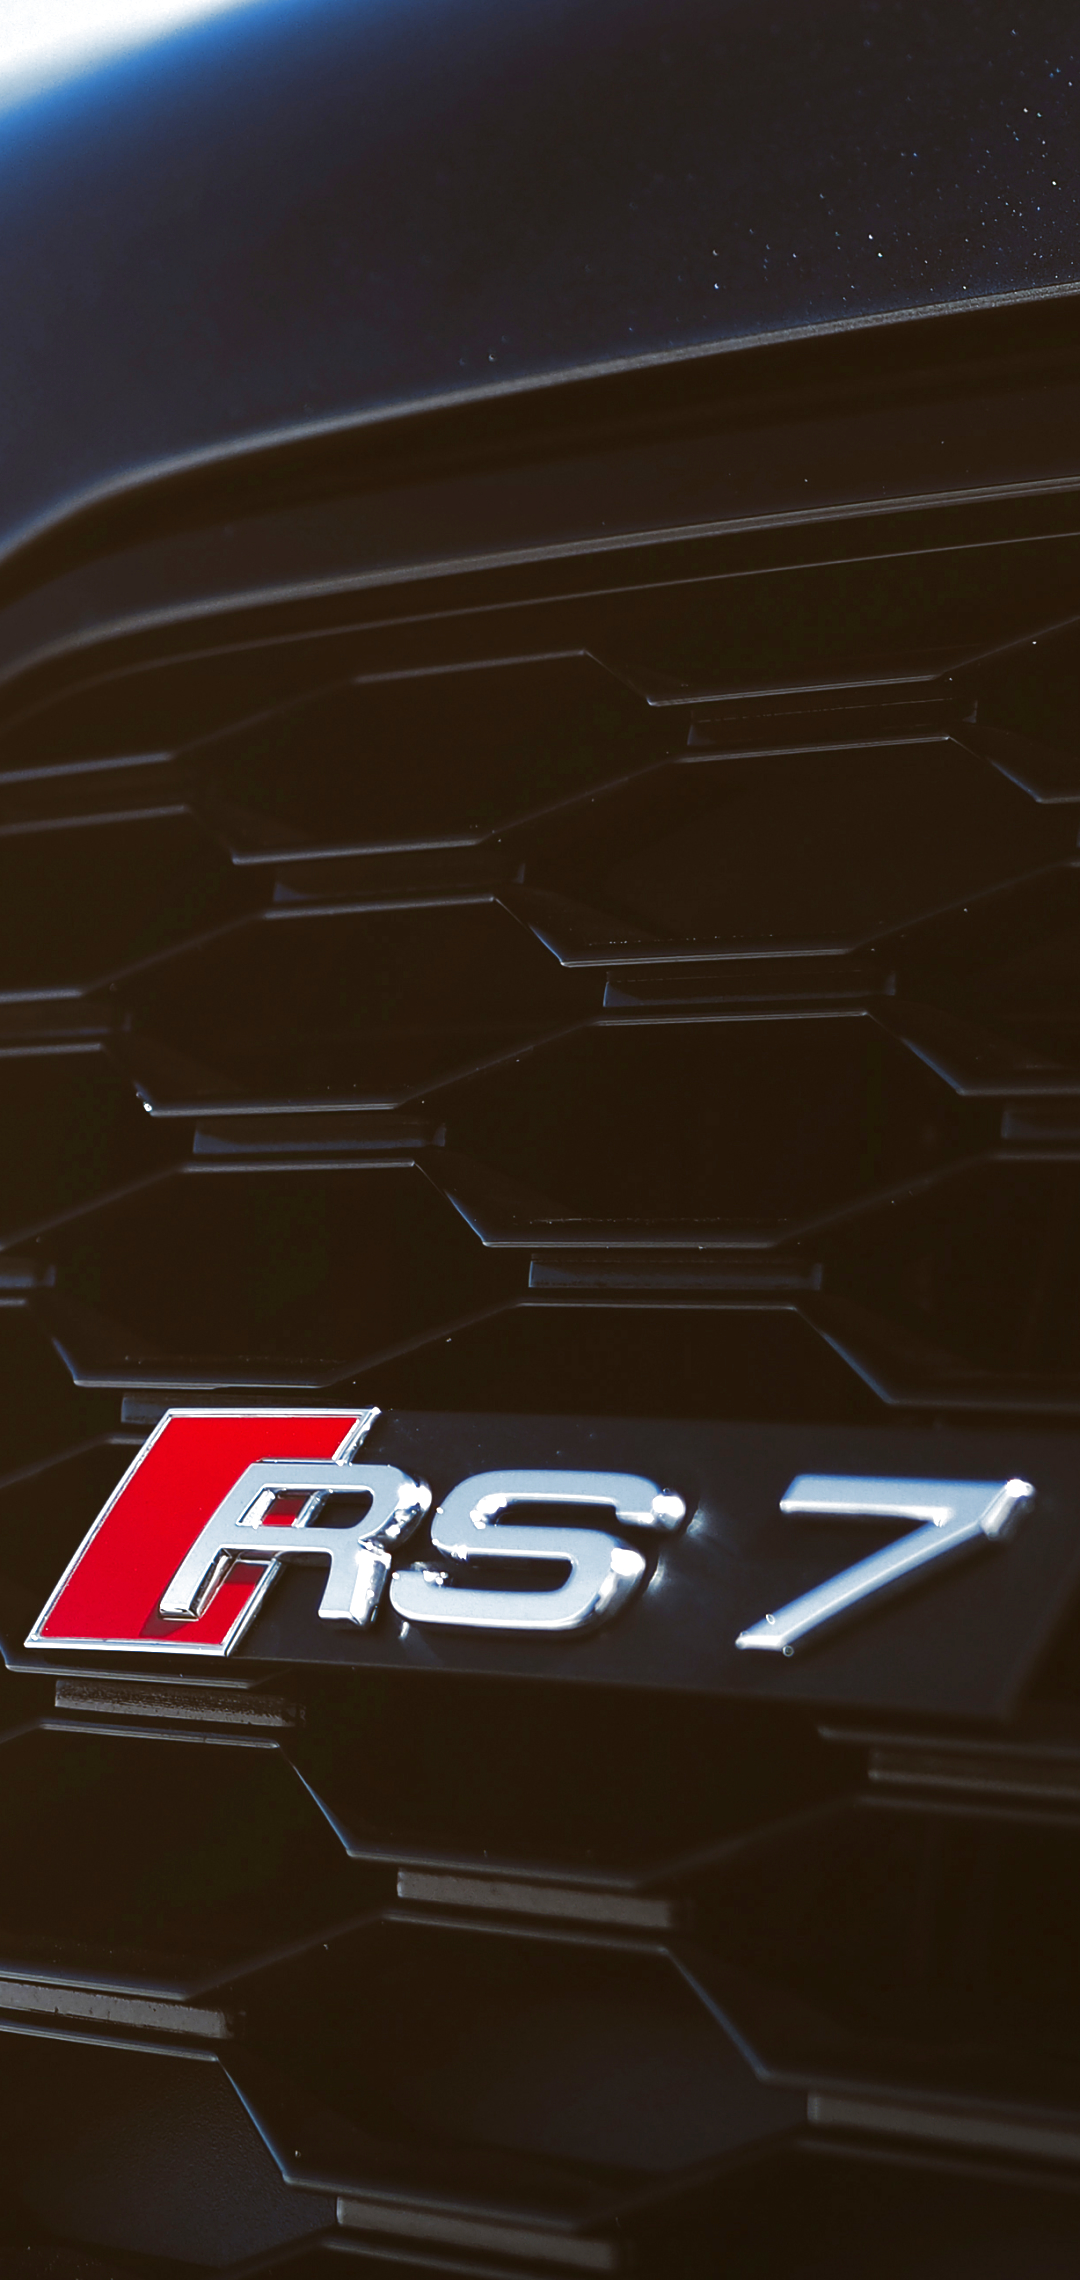 Audi Rs7 Black Side View Luxury Cars Blurred for S iPhone Wallpapers  Free Download